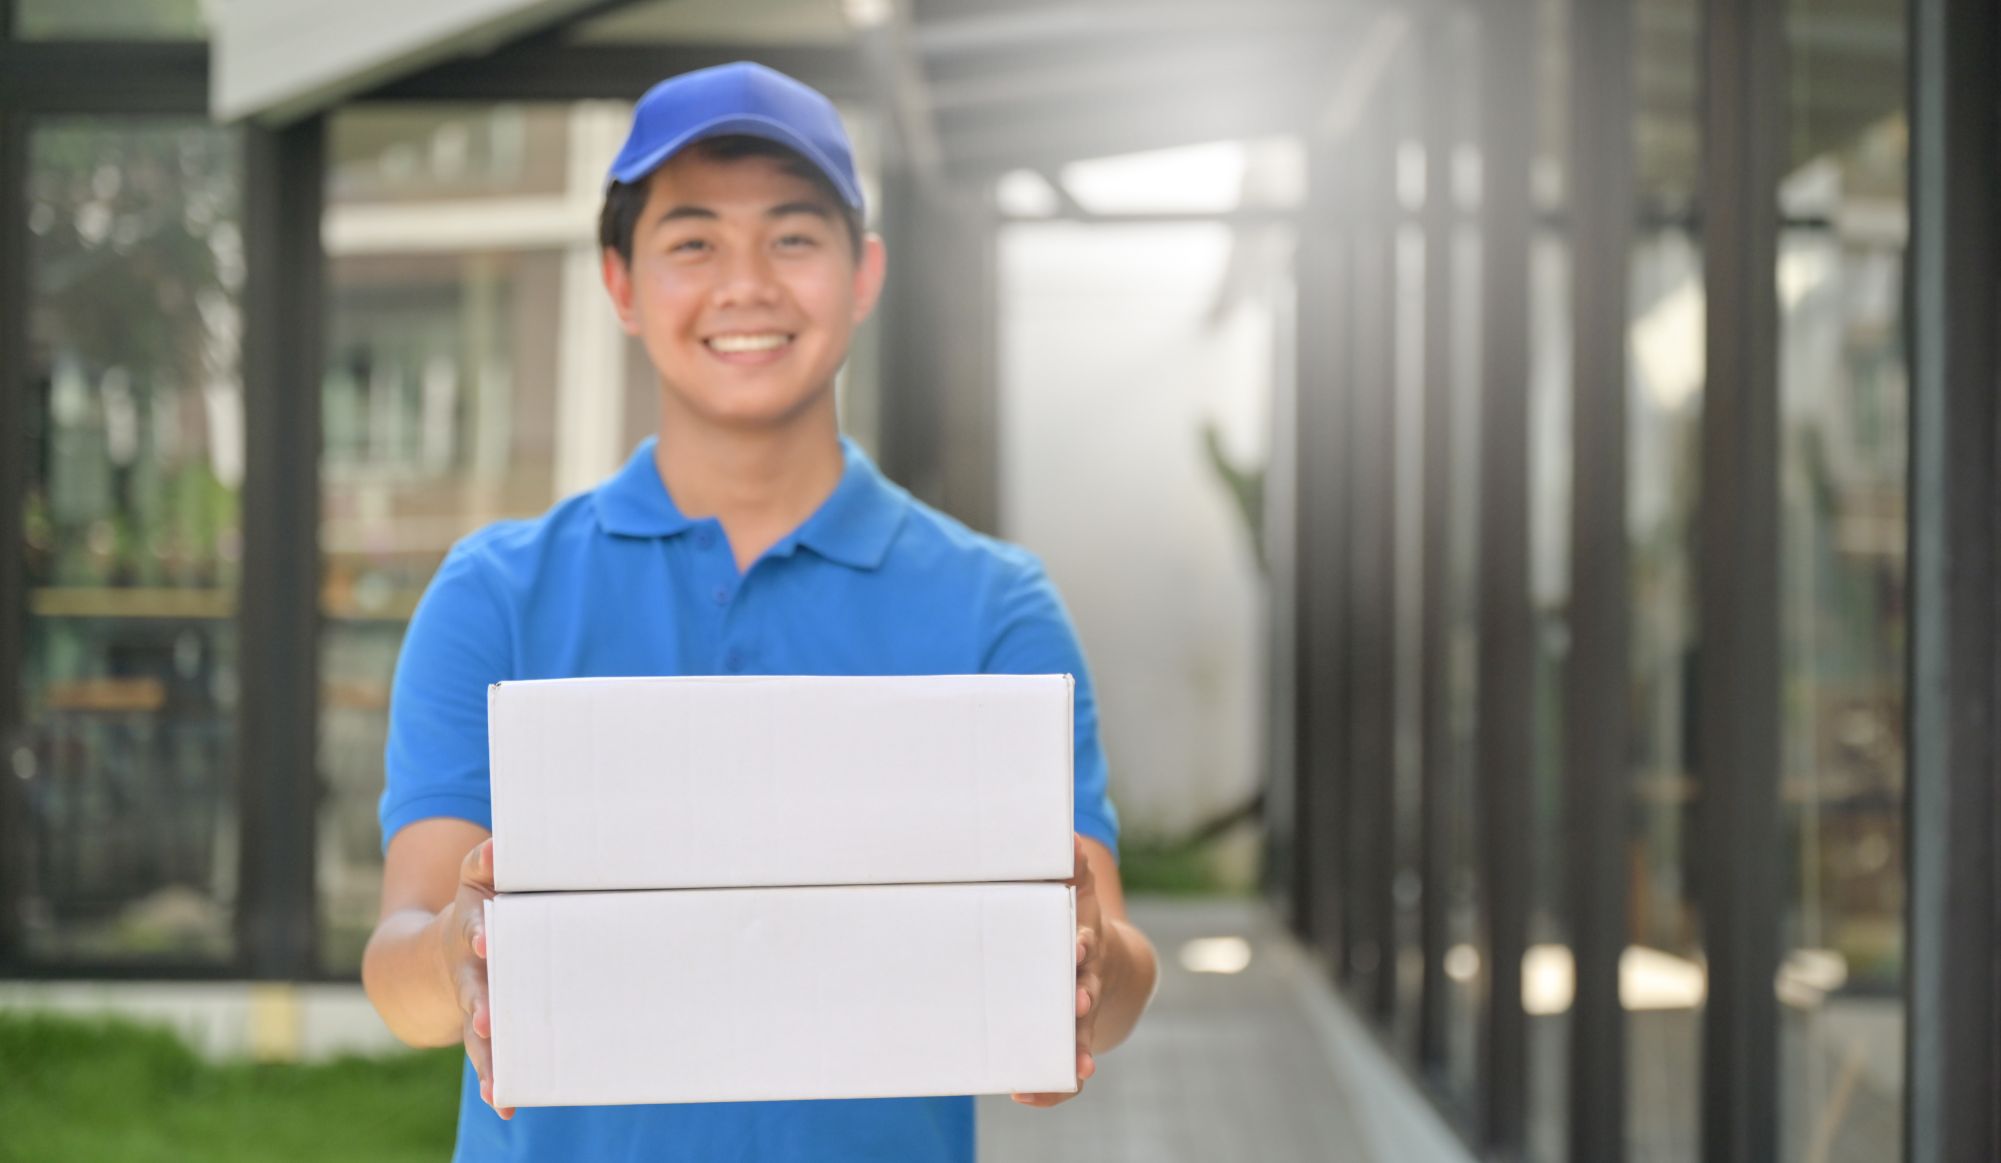 parcel delivery worker holding a box in hand ready HRVWCHZ